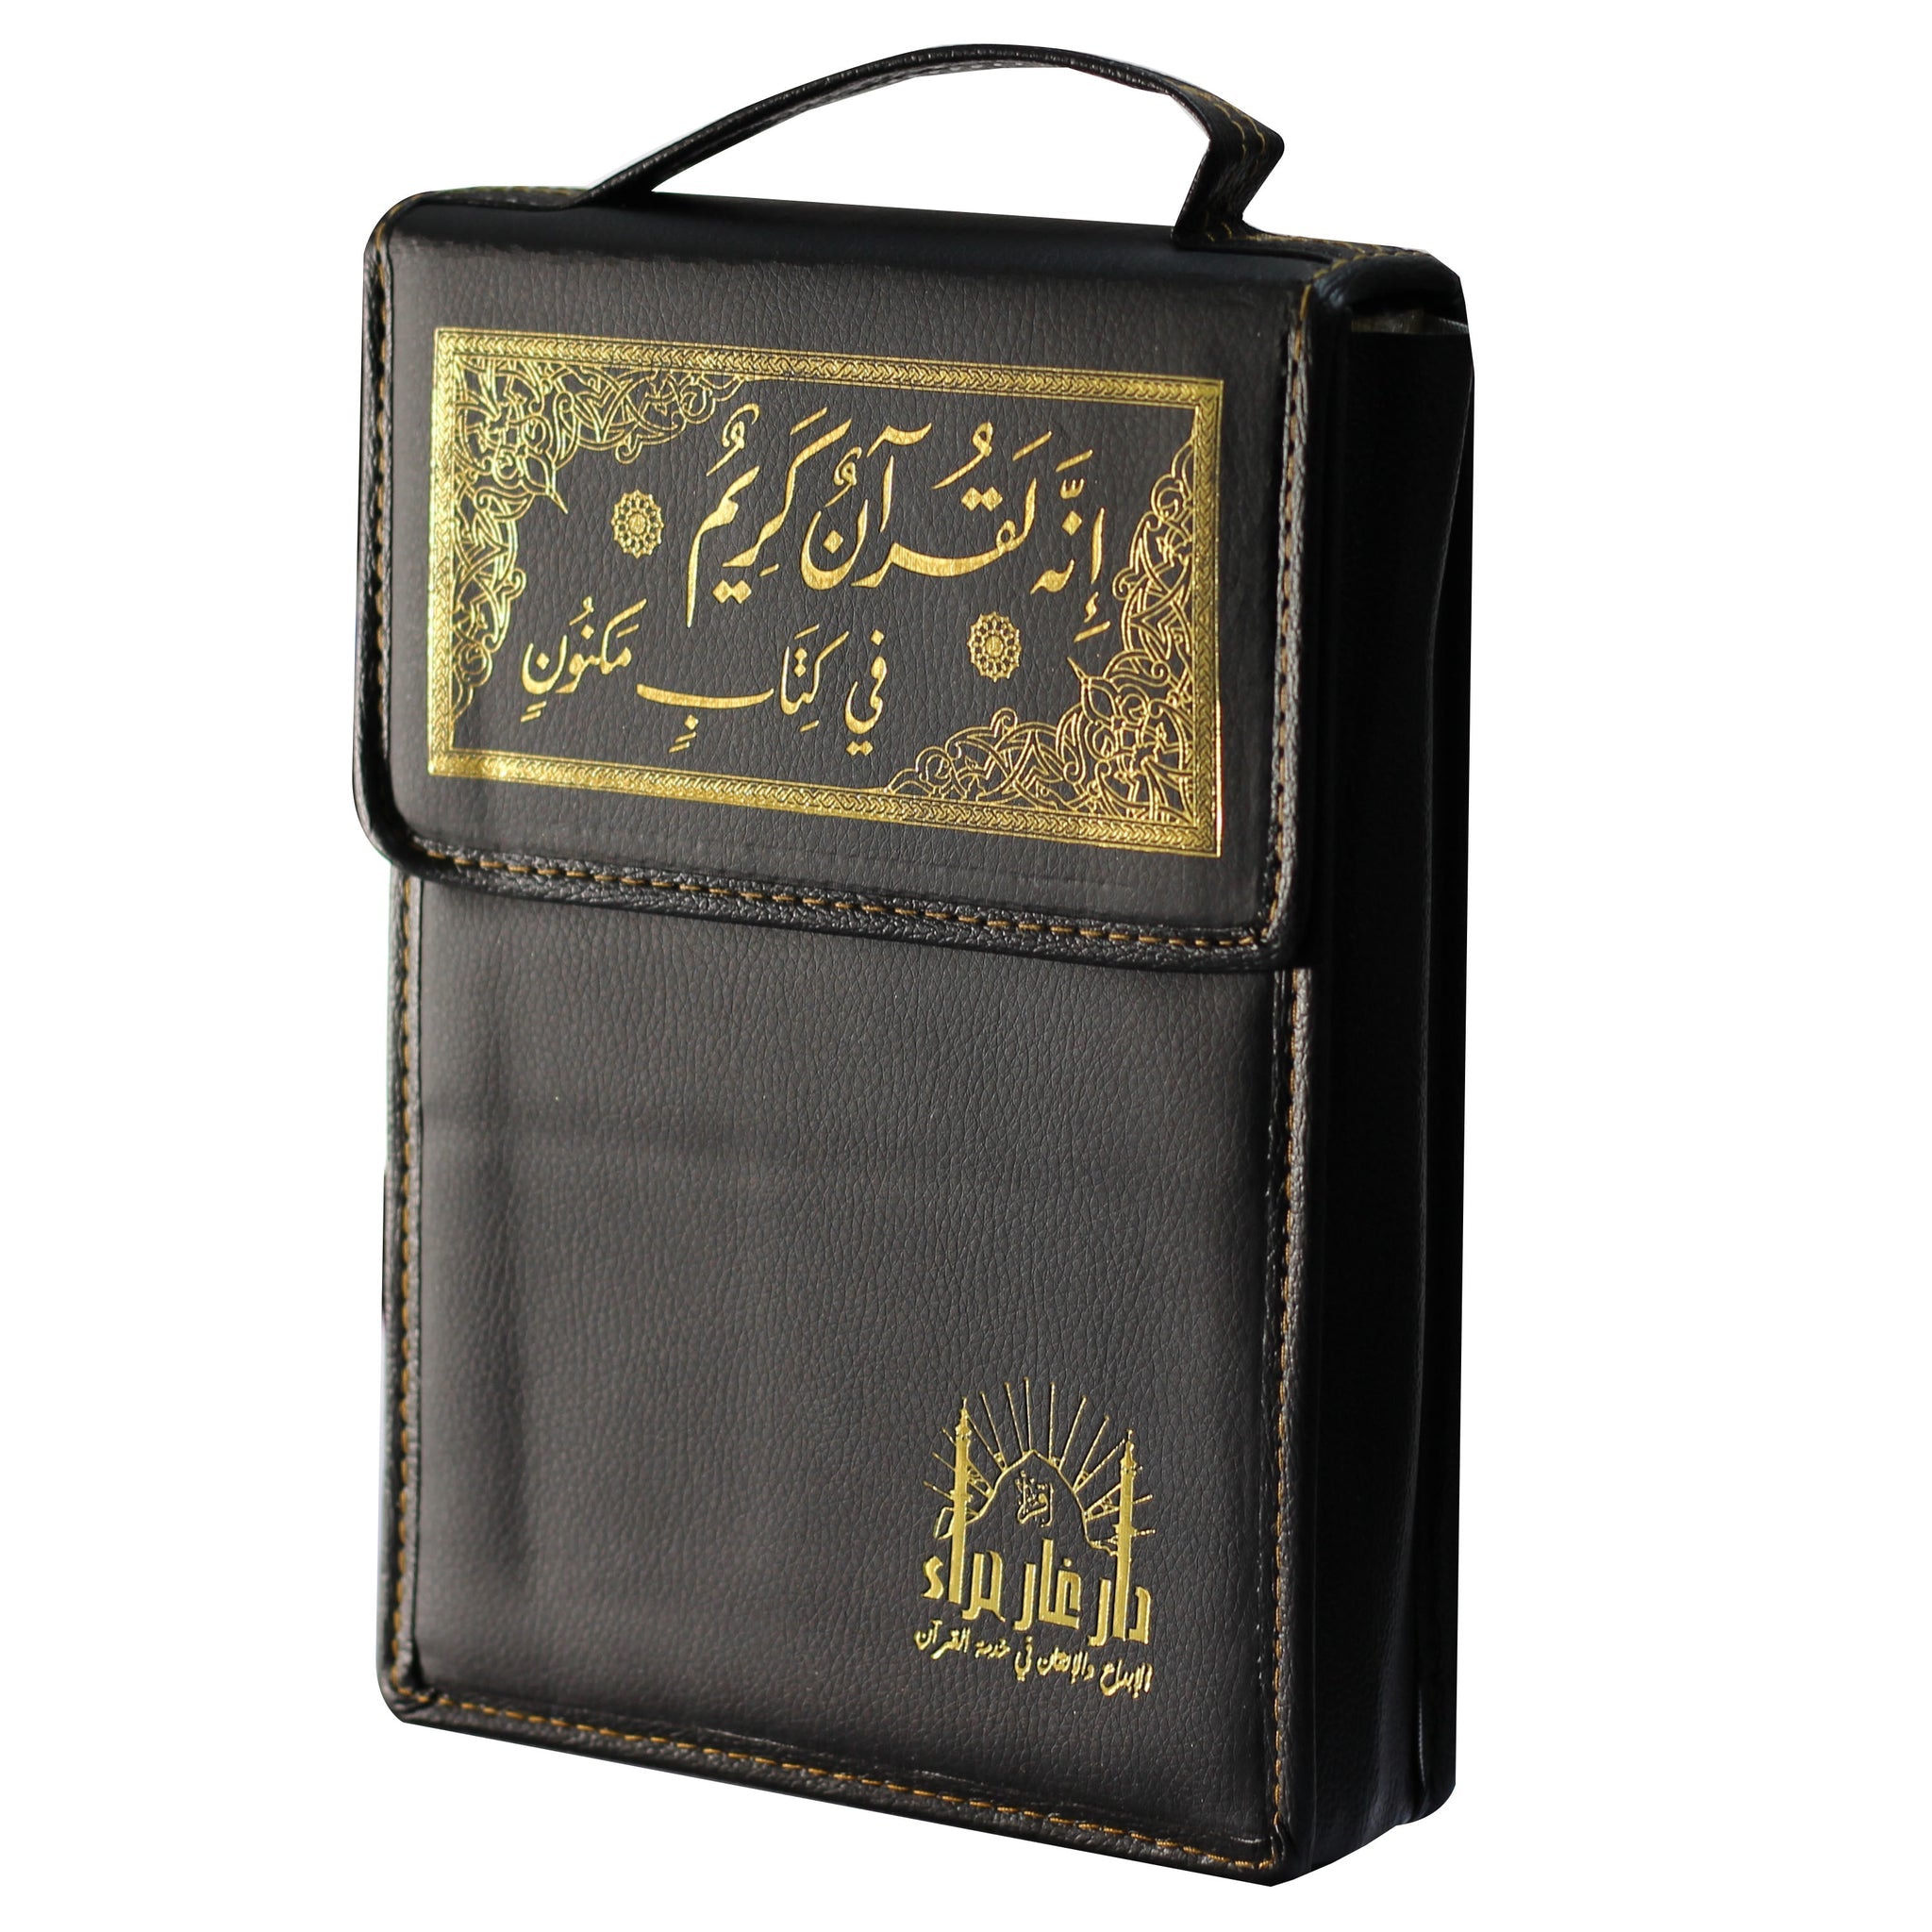 The Holy Quran in 30 parts in Leather Bag - 17 * 24 cm